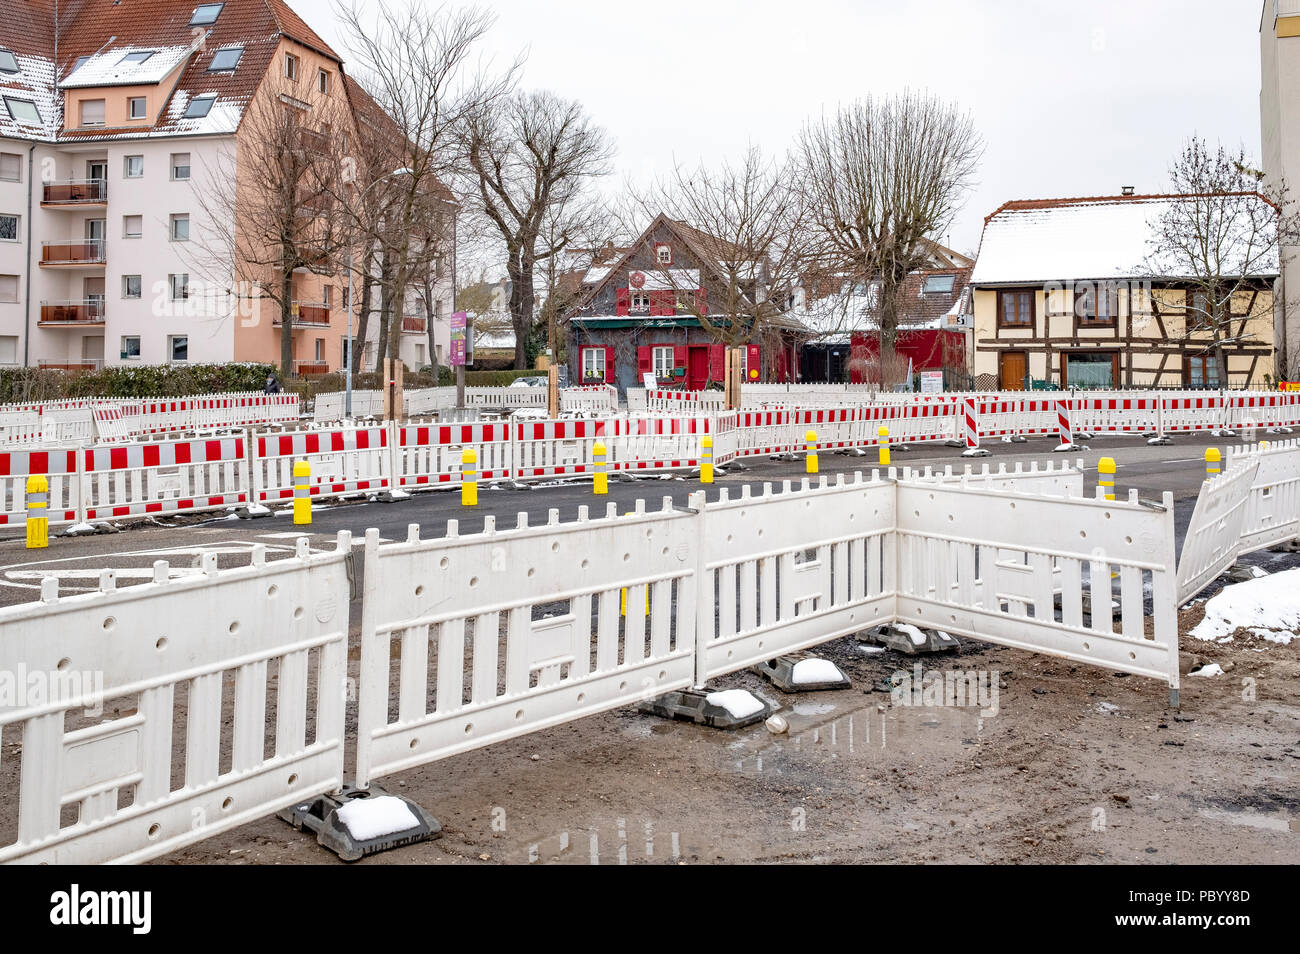 Strasbourg, preliminary tram construction site, line E extension, safety plastic barriers, houses, Alsace, France, Europe, Stock Photo